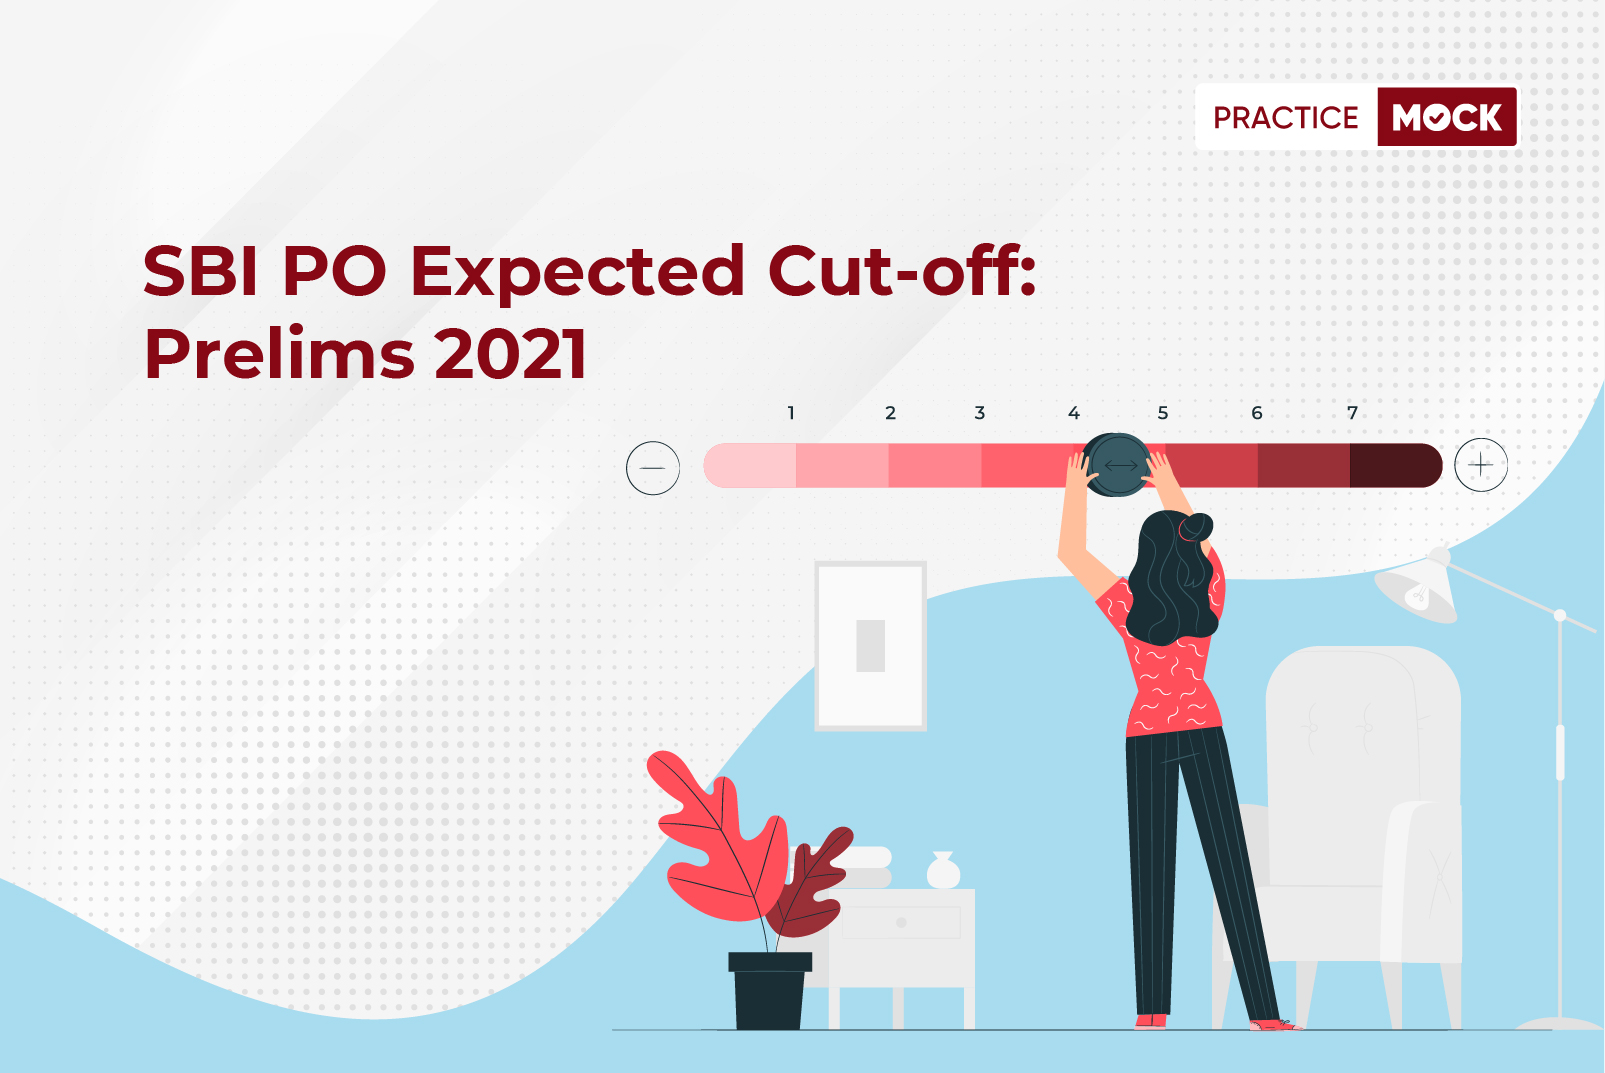 SBI PO Expected Cut-off Prelims 2021